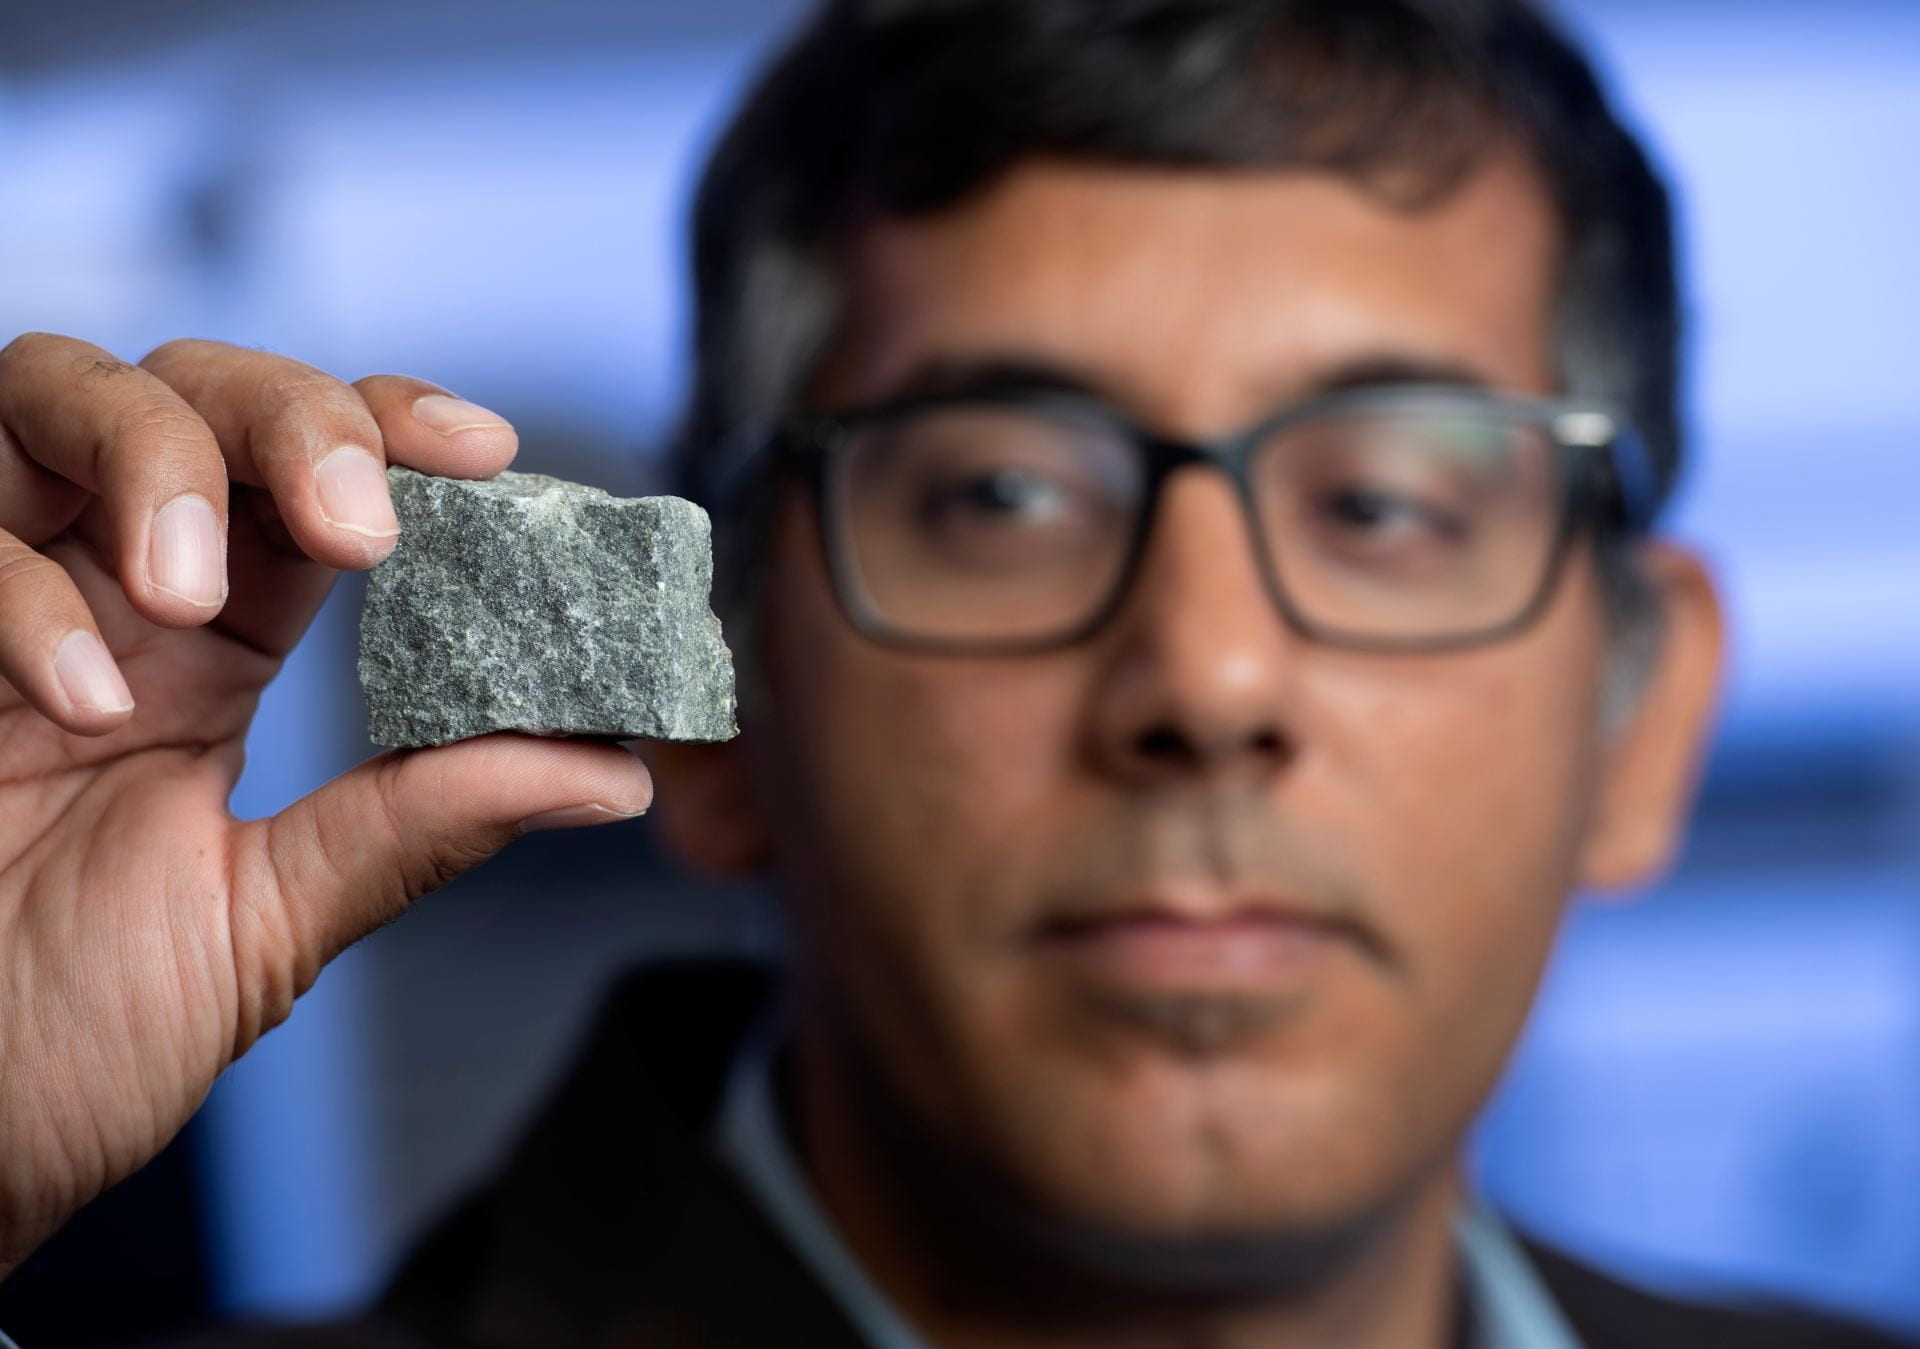 M.J. Abdolhosseini Qomi, UCI associate professor of civil and environmental engineering, says: “Certain types of rocks, such as those containing basalt, are rich in divalent metal cations that naturally convert CO2 into stable metal carbonate matter. Understanding how this process works at the molecular level will help us utilize this beneficial chemistry to help solve the problem of runaway climate change.”